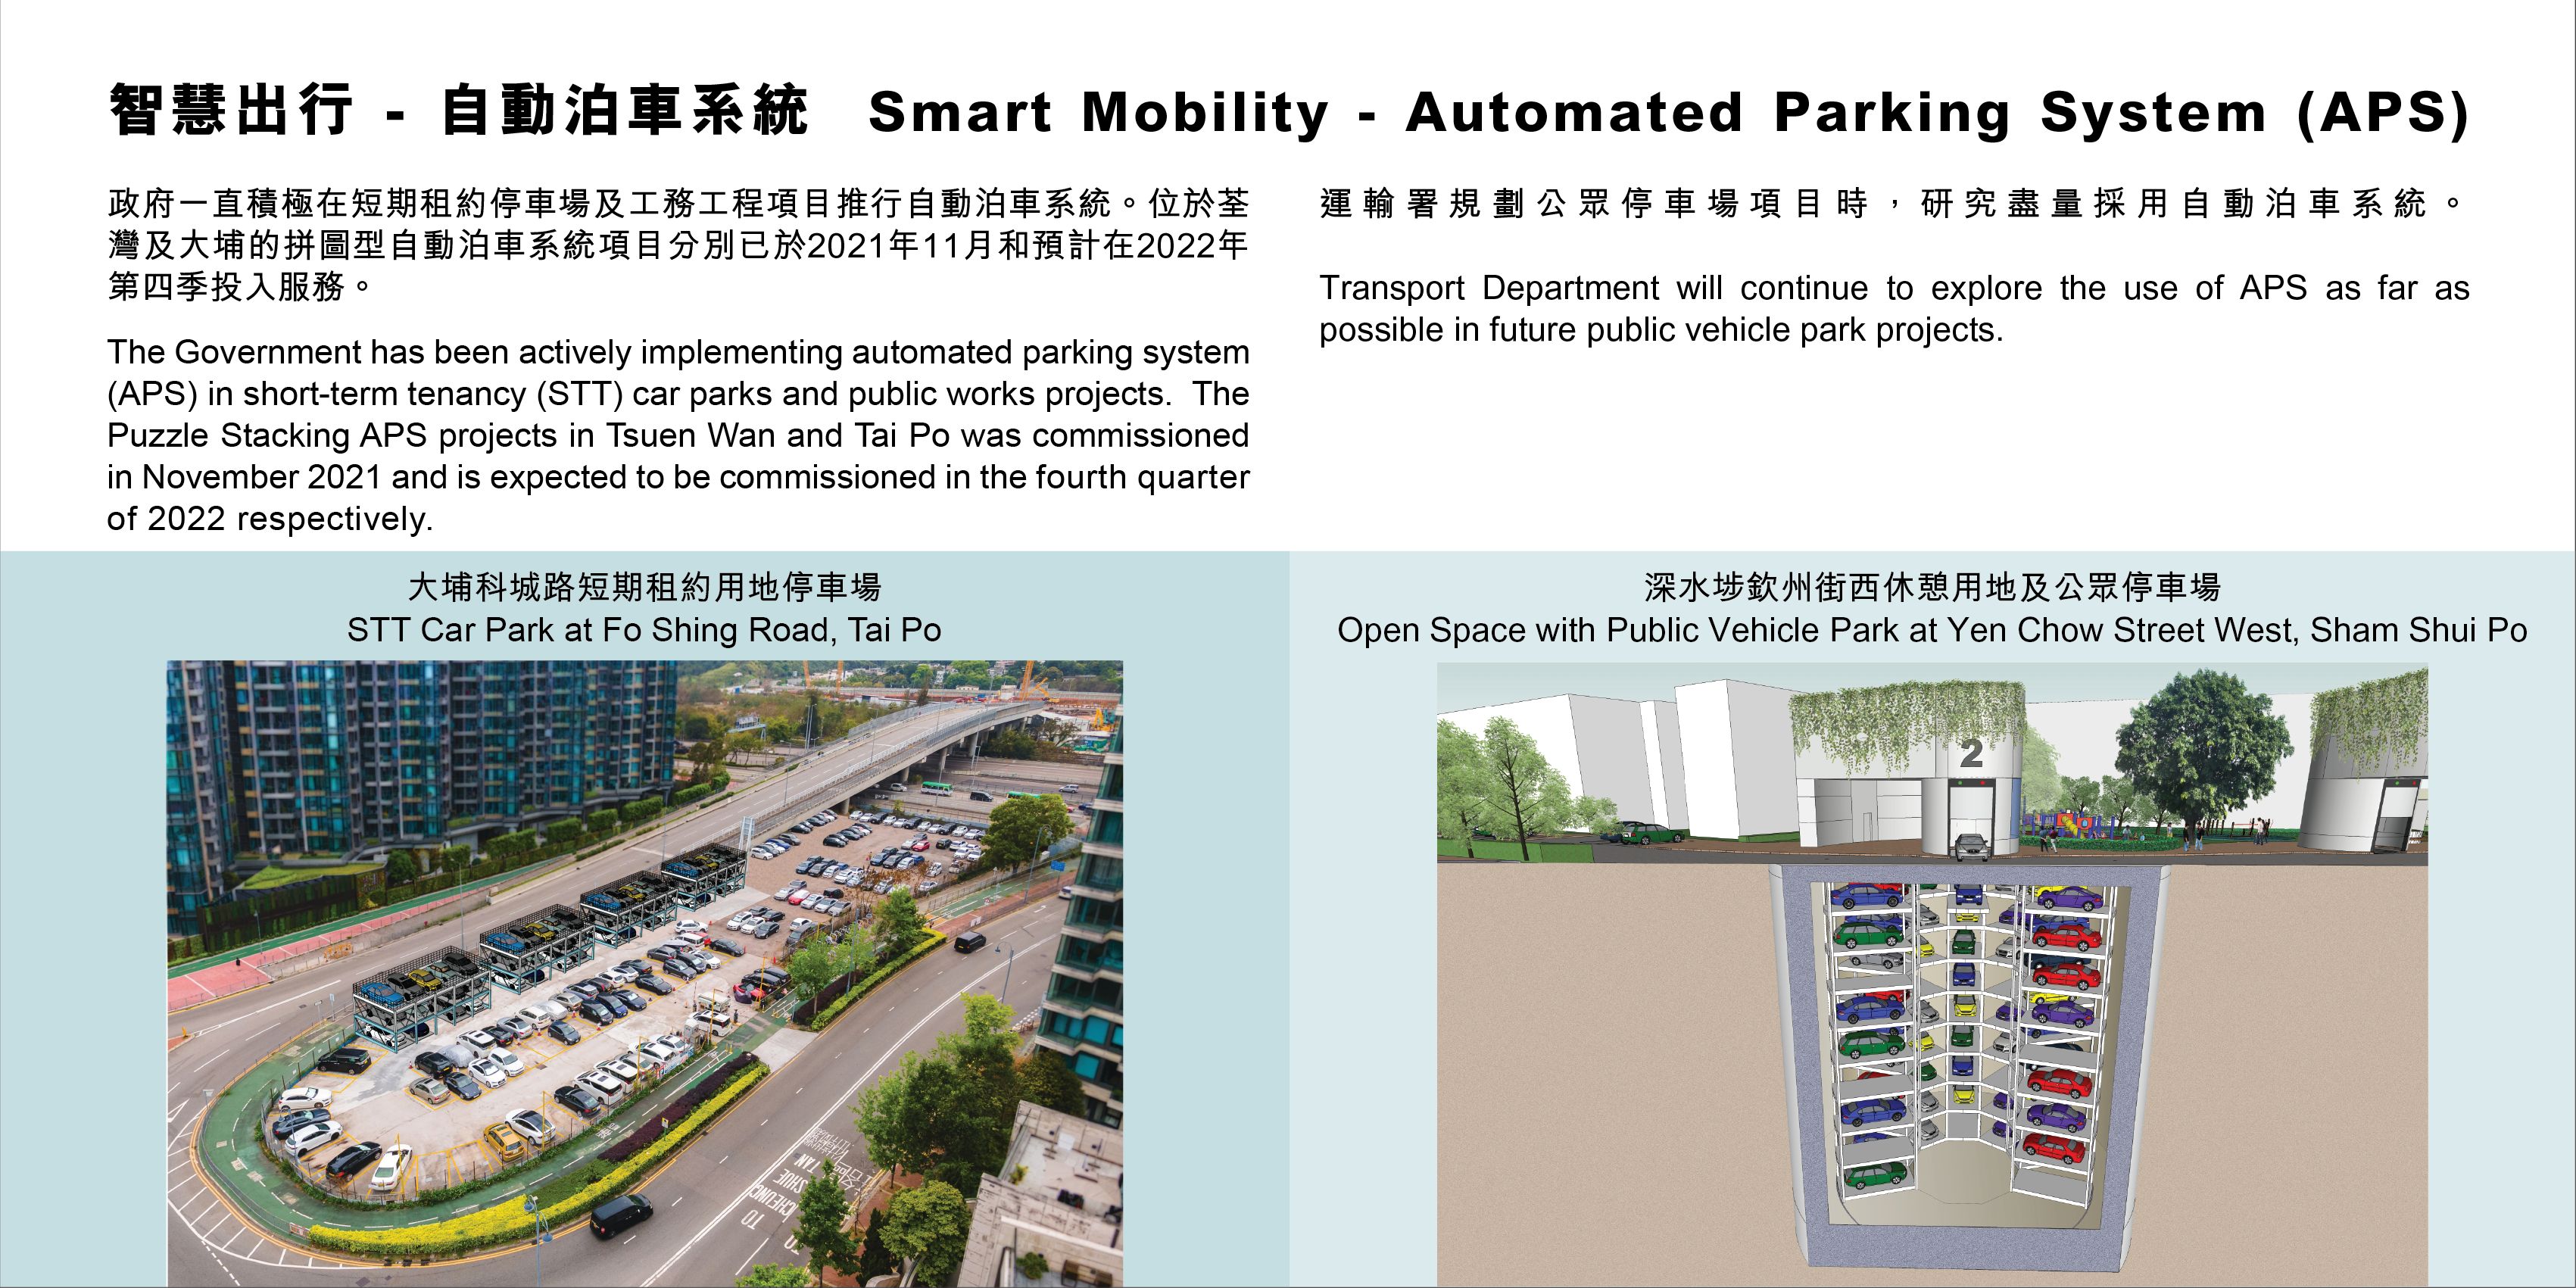 Smart Mobility - Automated Parking System (APS)  - The Government has been actively implementing automated parking system (APS) in short-term tenancy (STT) car parks and public works projects.  The Puzzle Stacking APS projects in Tsuen Wan and Tai Po was commissioned in November 2021 and is expected to be commissioned in the fourth quarter of 2022 respectively. Transport Department will continue to explore the use of APS as far as possible in future public vehicle park projects.